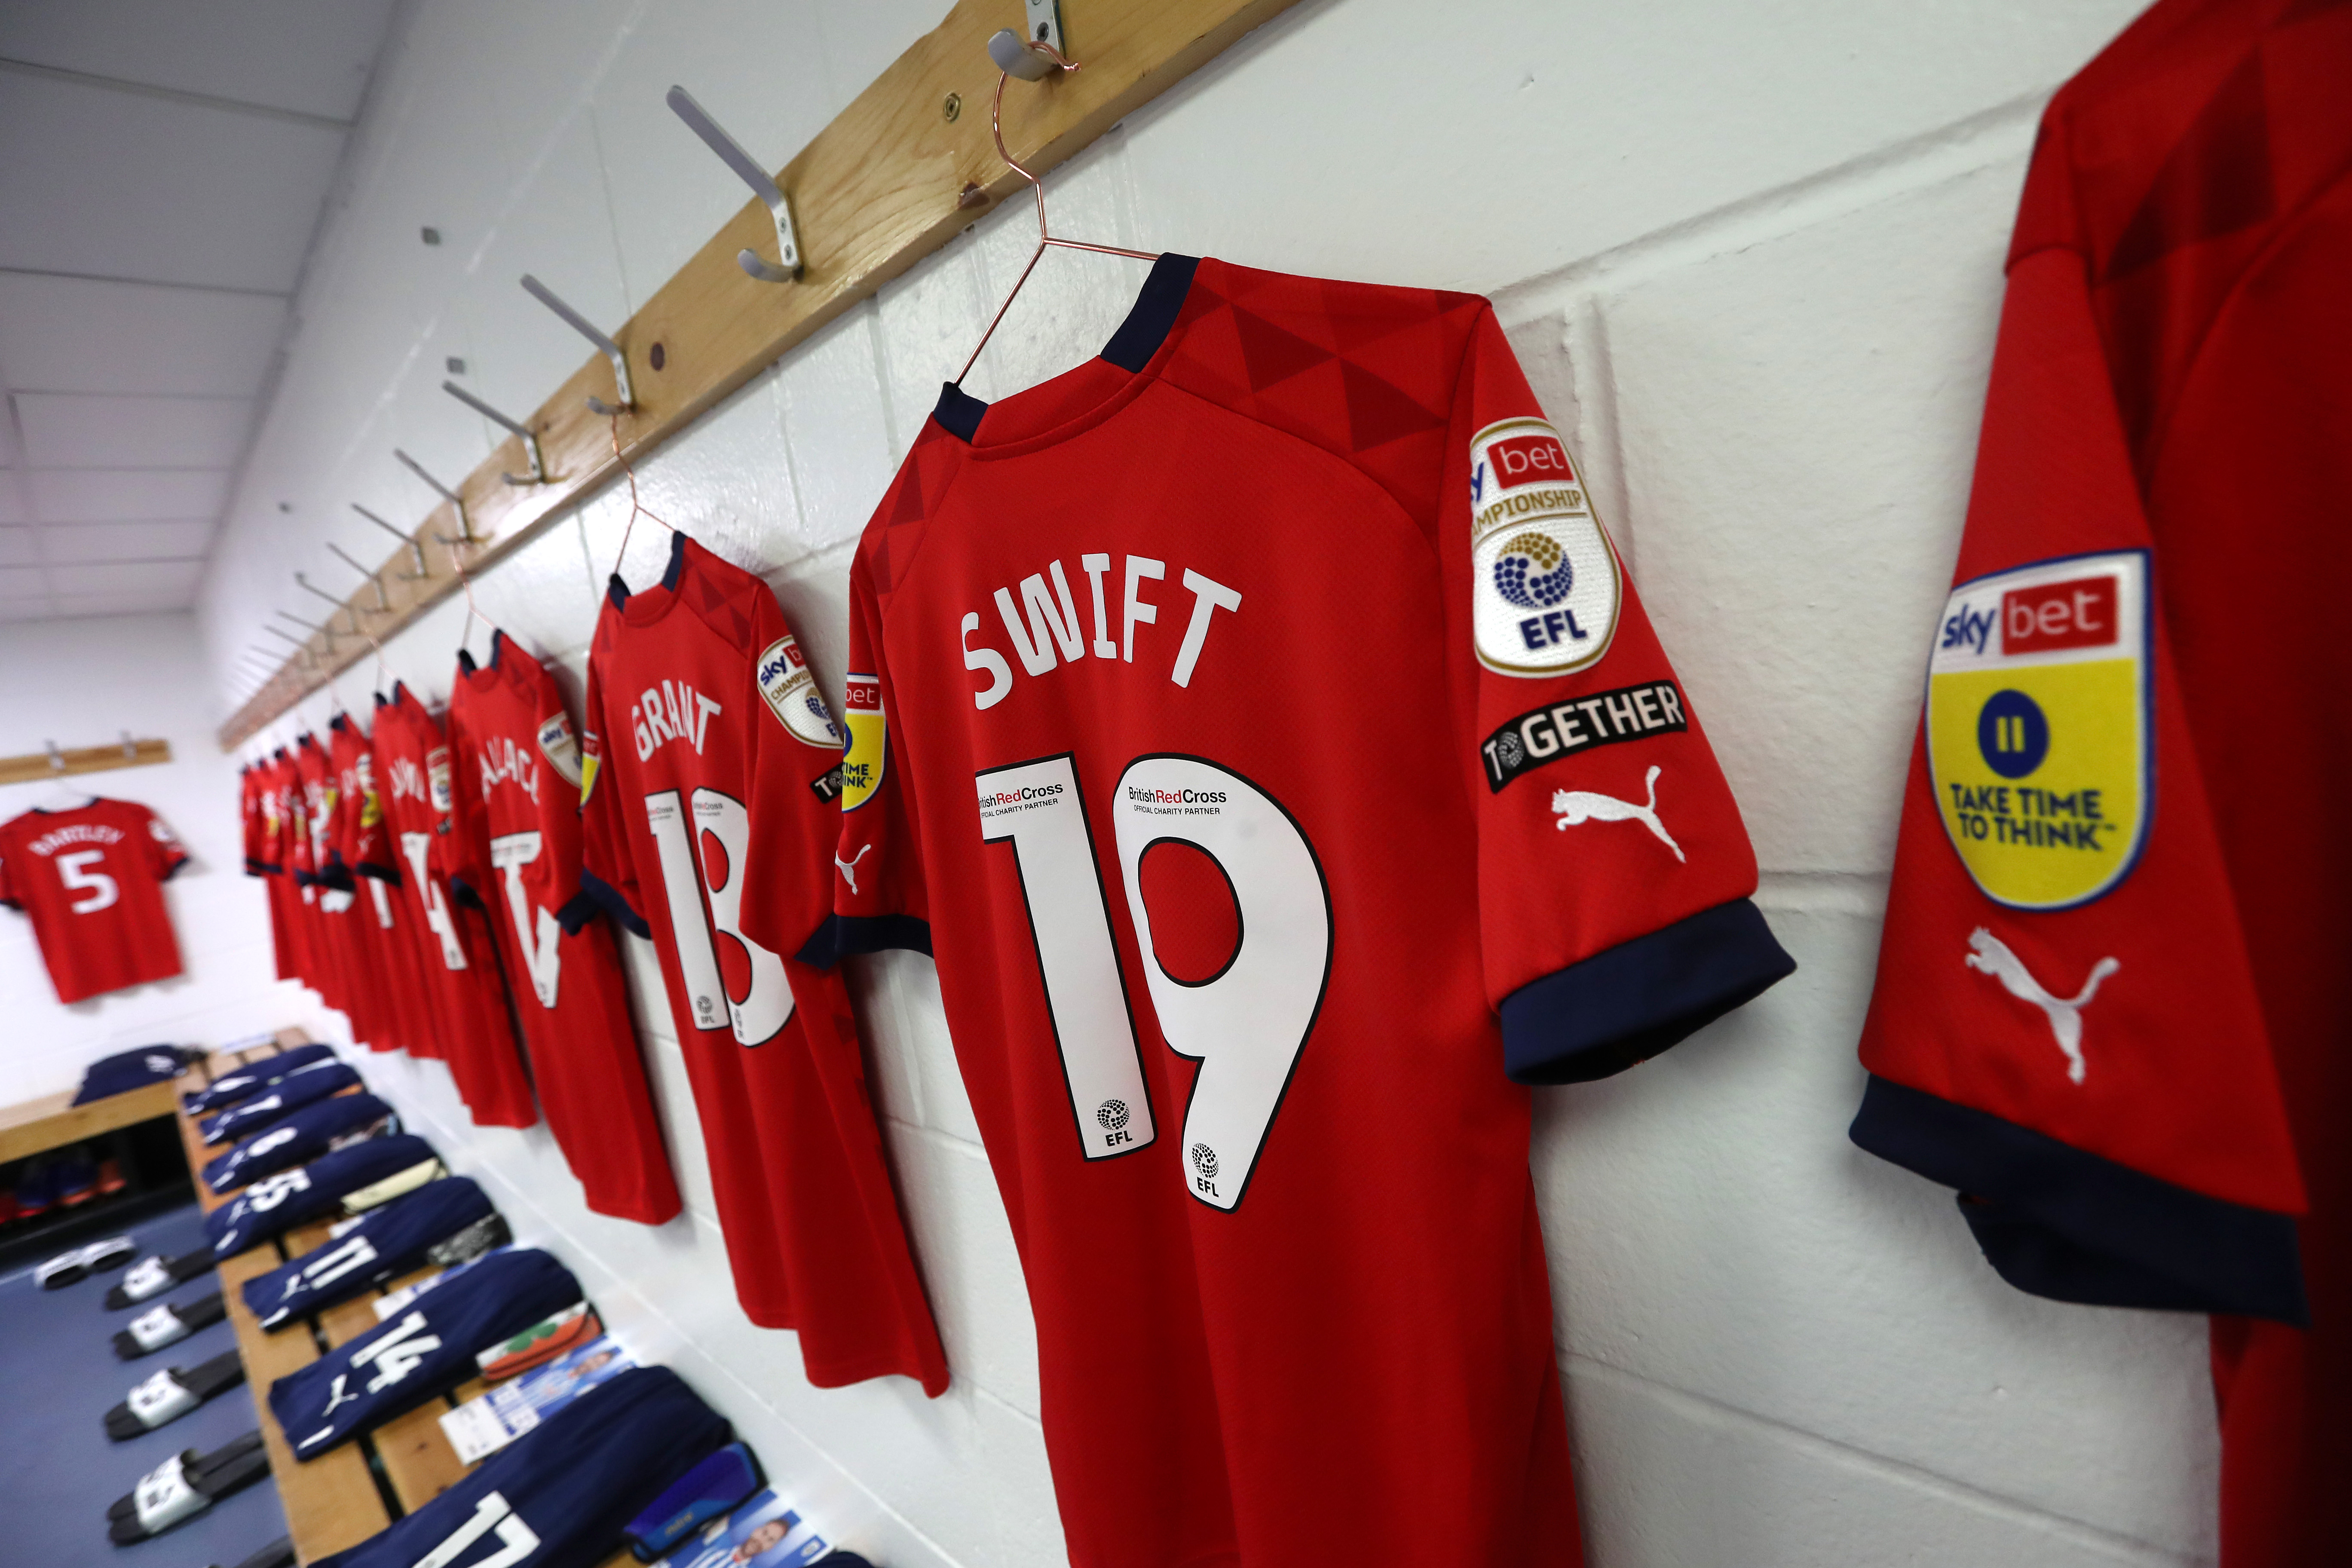 John Swift's red third shirt hanging up in the dressing room